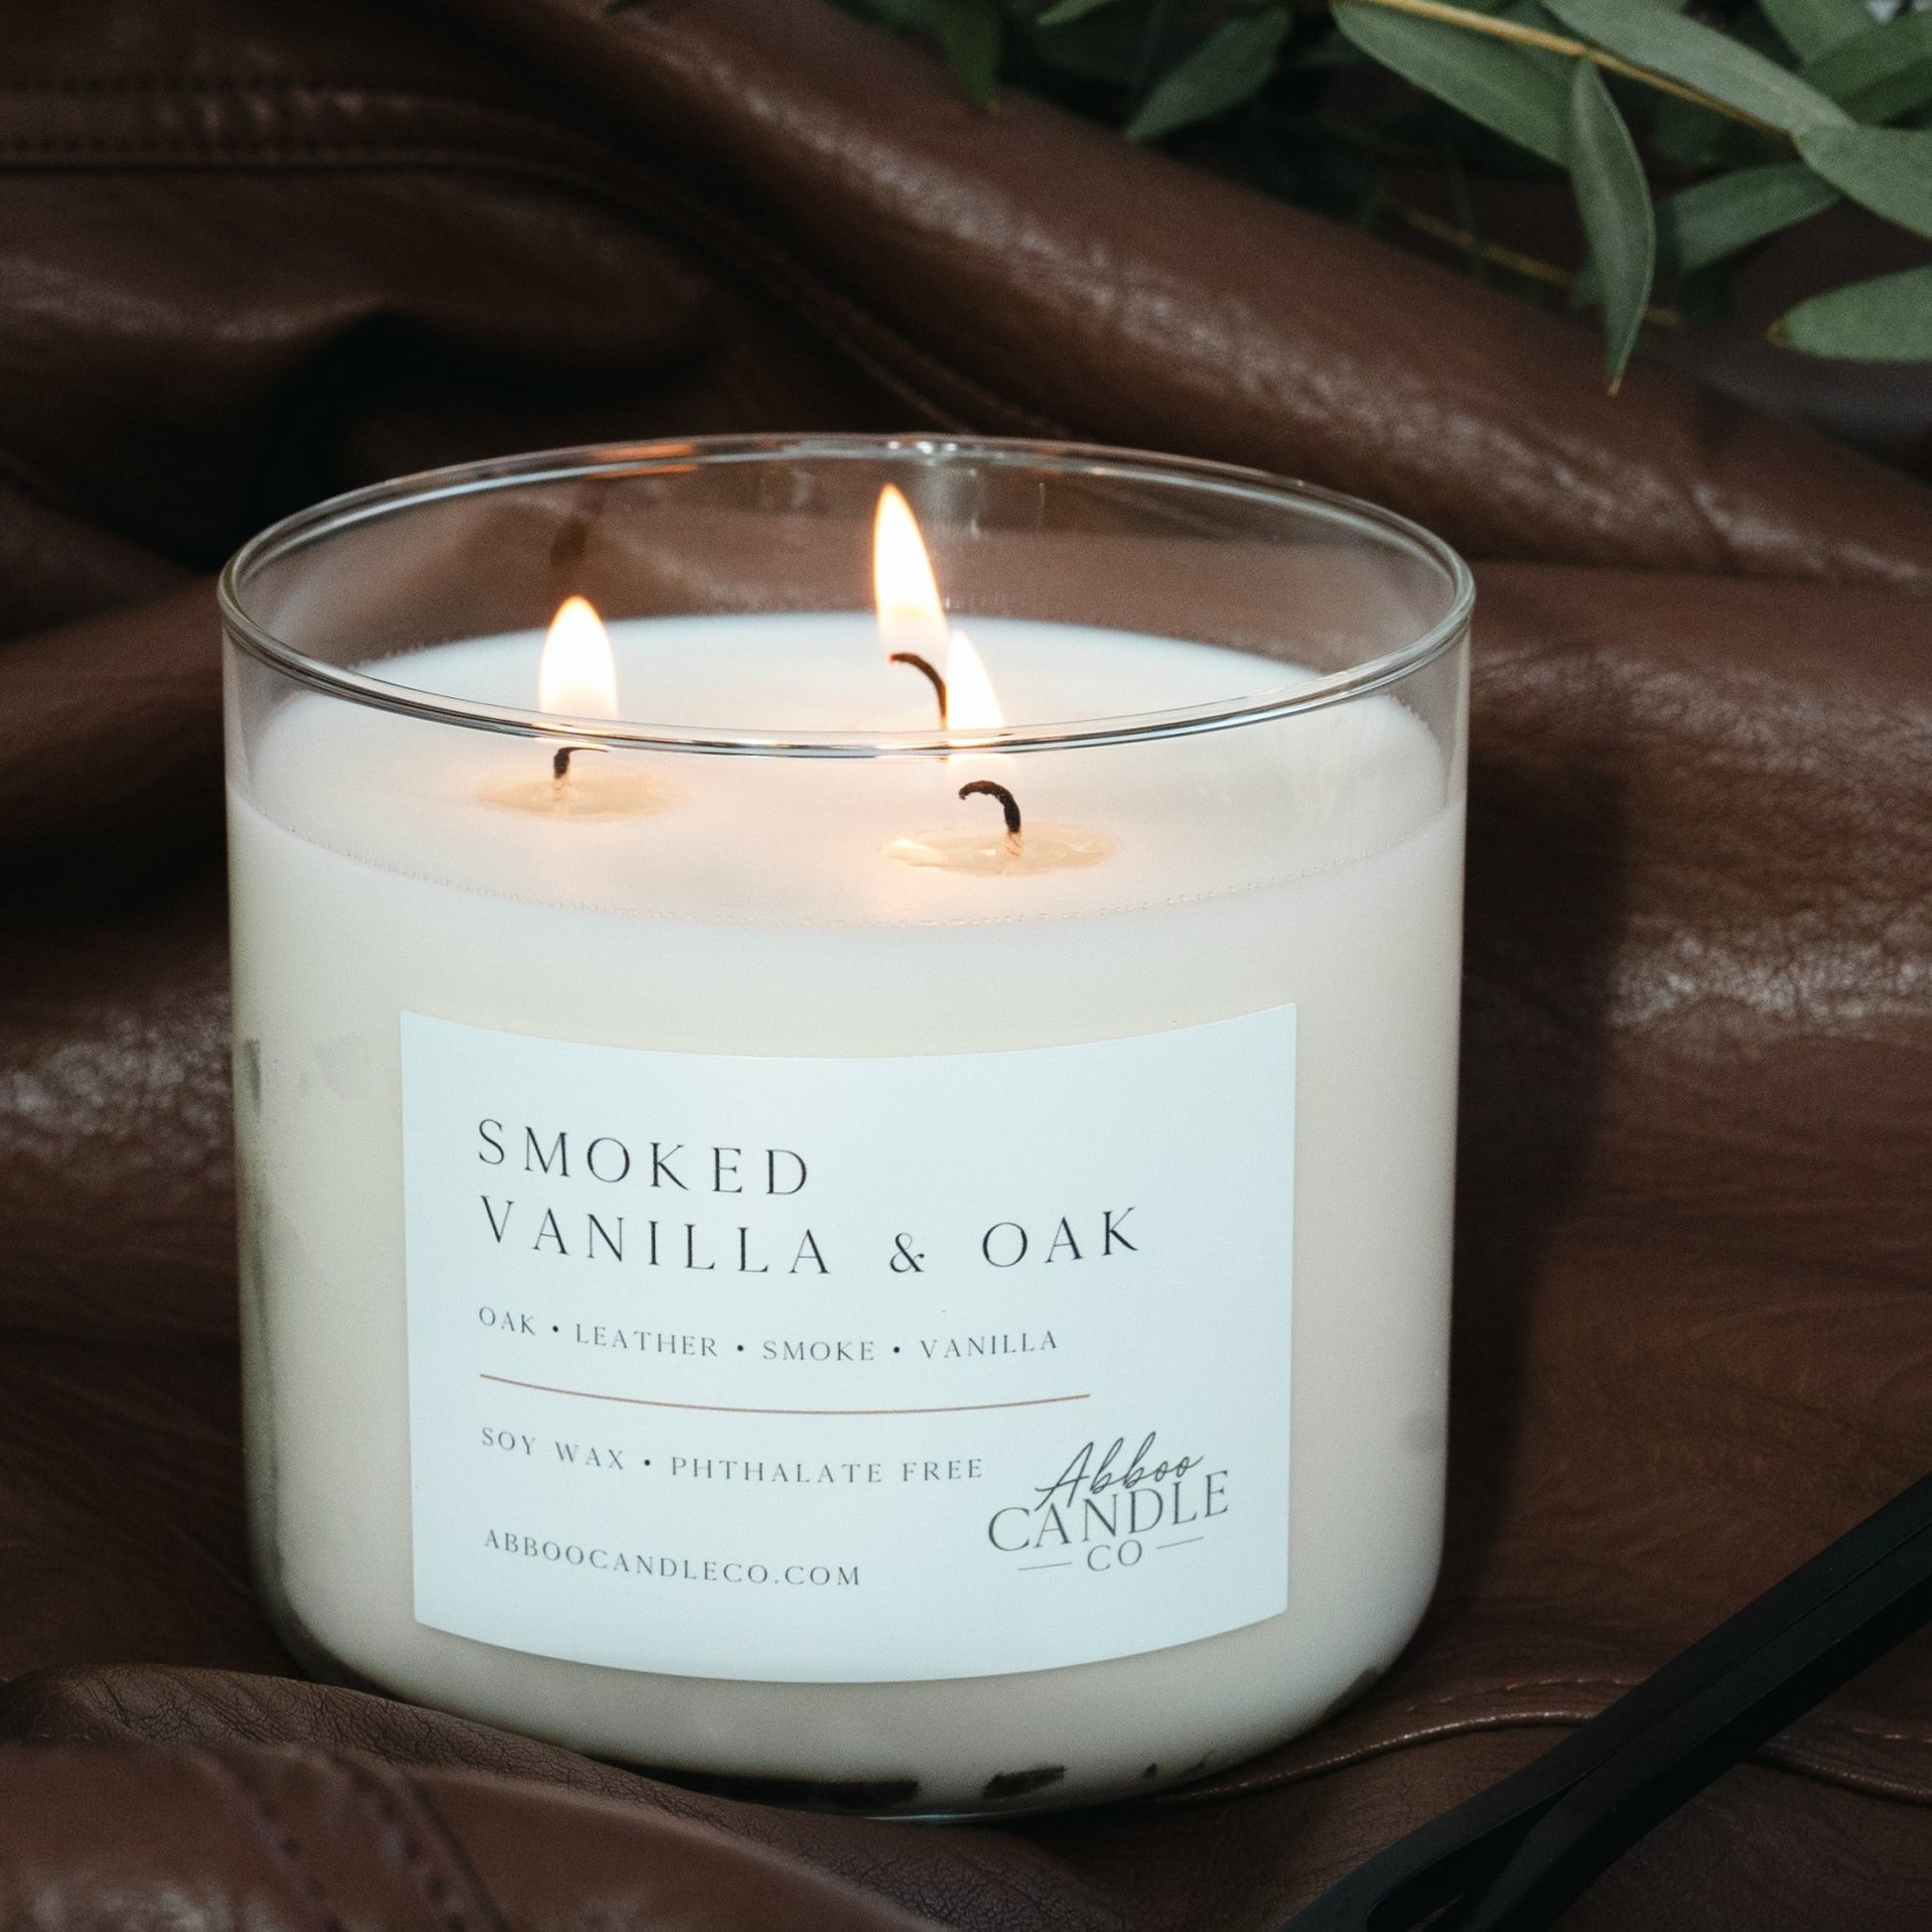 Smoked Vanilla and Oak 3-Wick Soy Candle - Abboo Candle Co